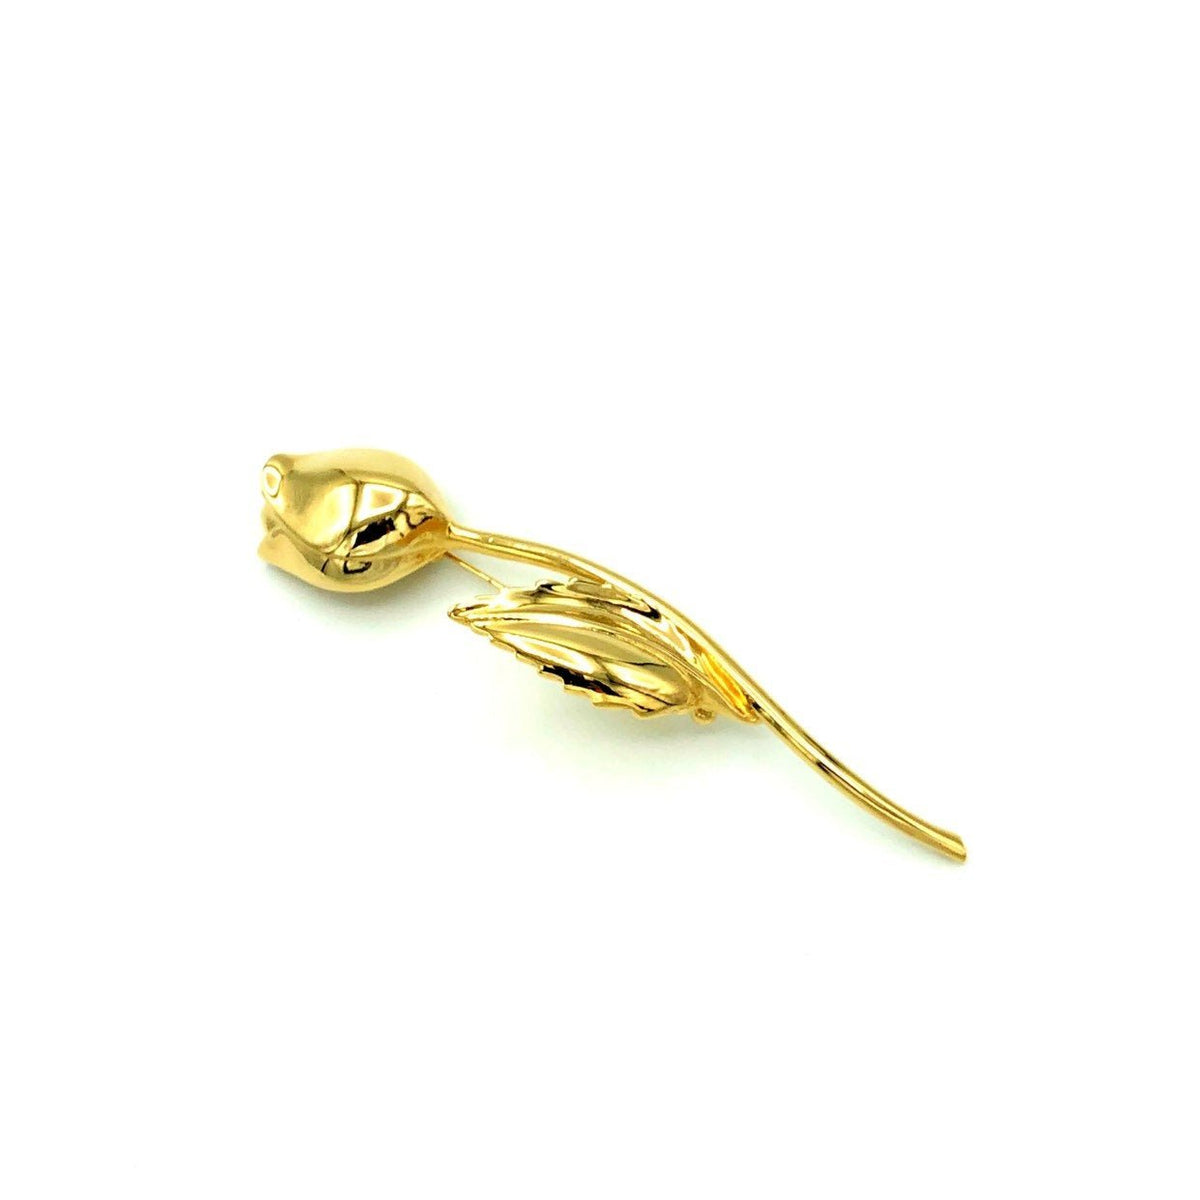 Gold Givenchy Long Stem Rose Vintage Brooch Pin - 24 Wishes Vintage Jewelry